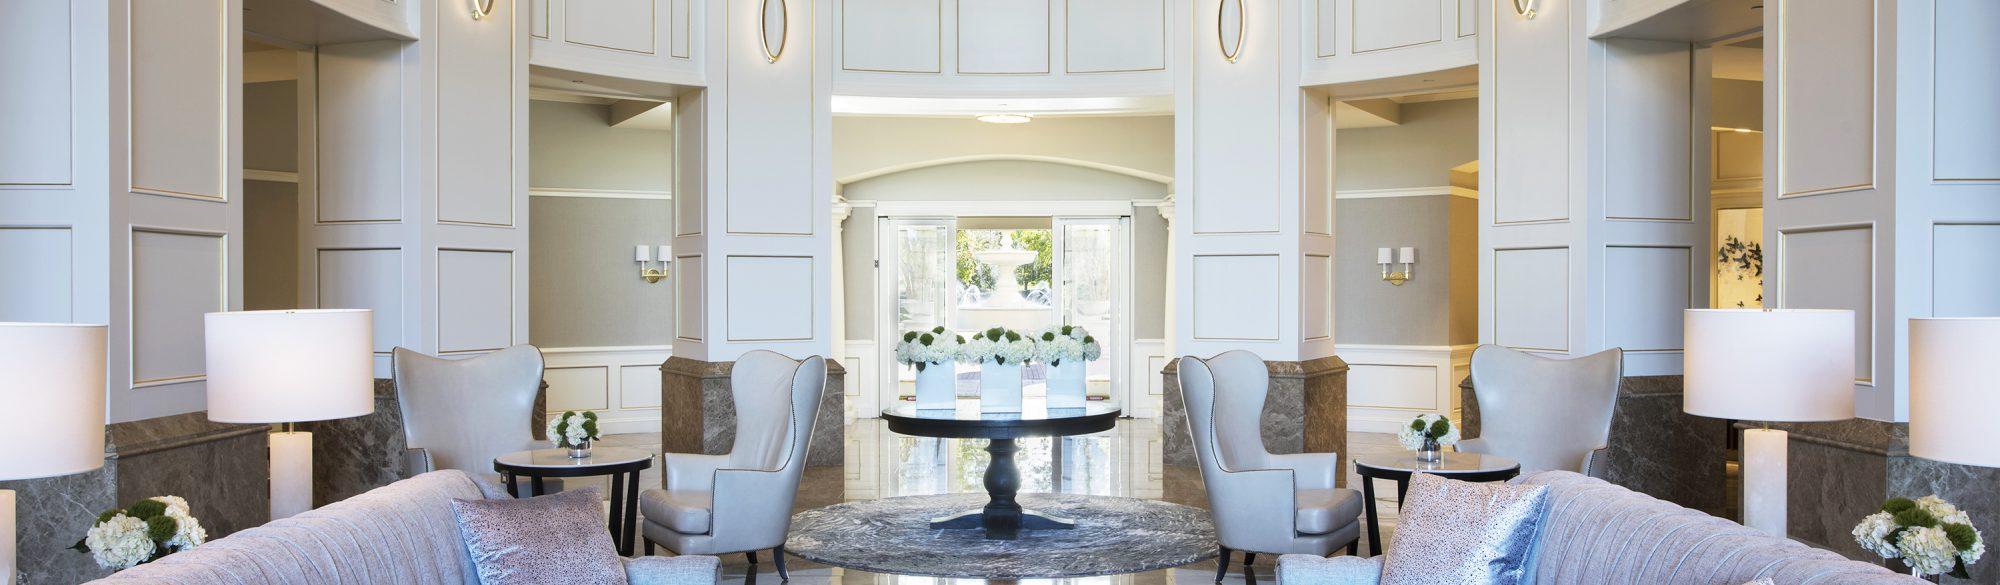 The Lobby at The Ballantyne, A Luxury Collection Hotel, Charlotte